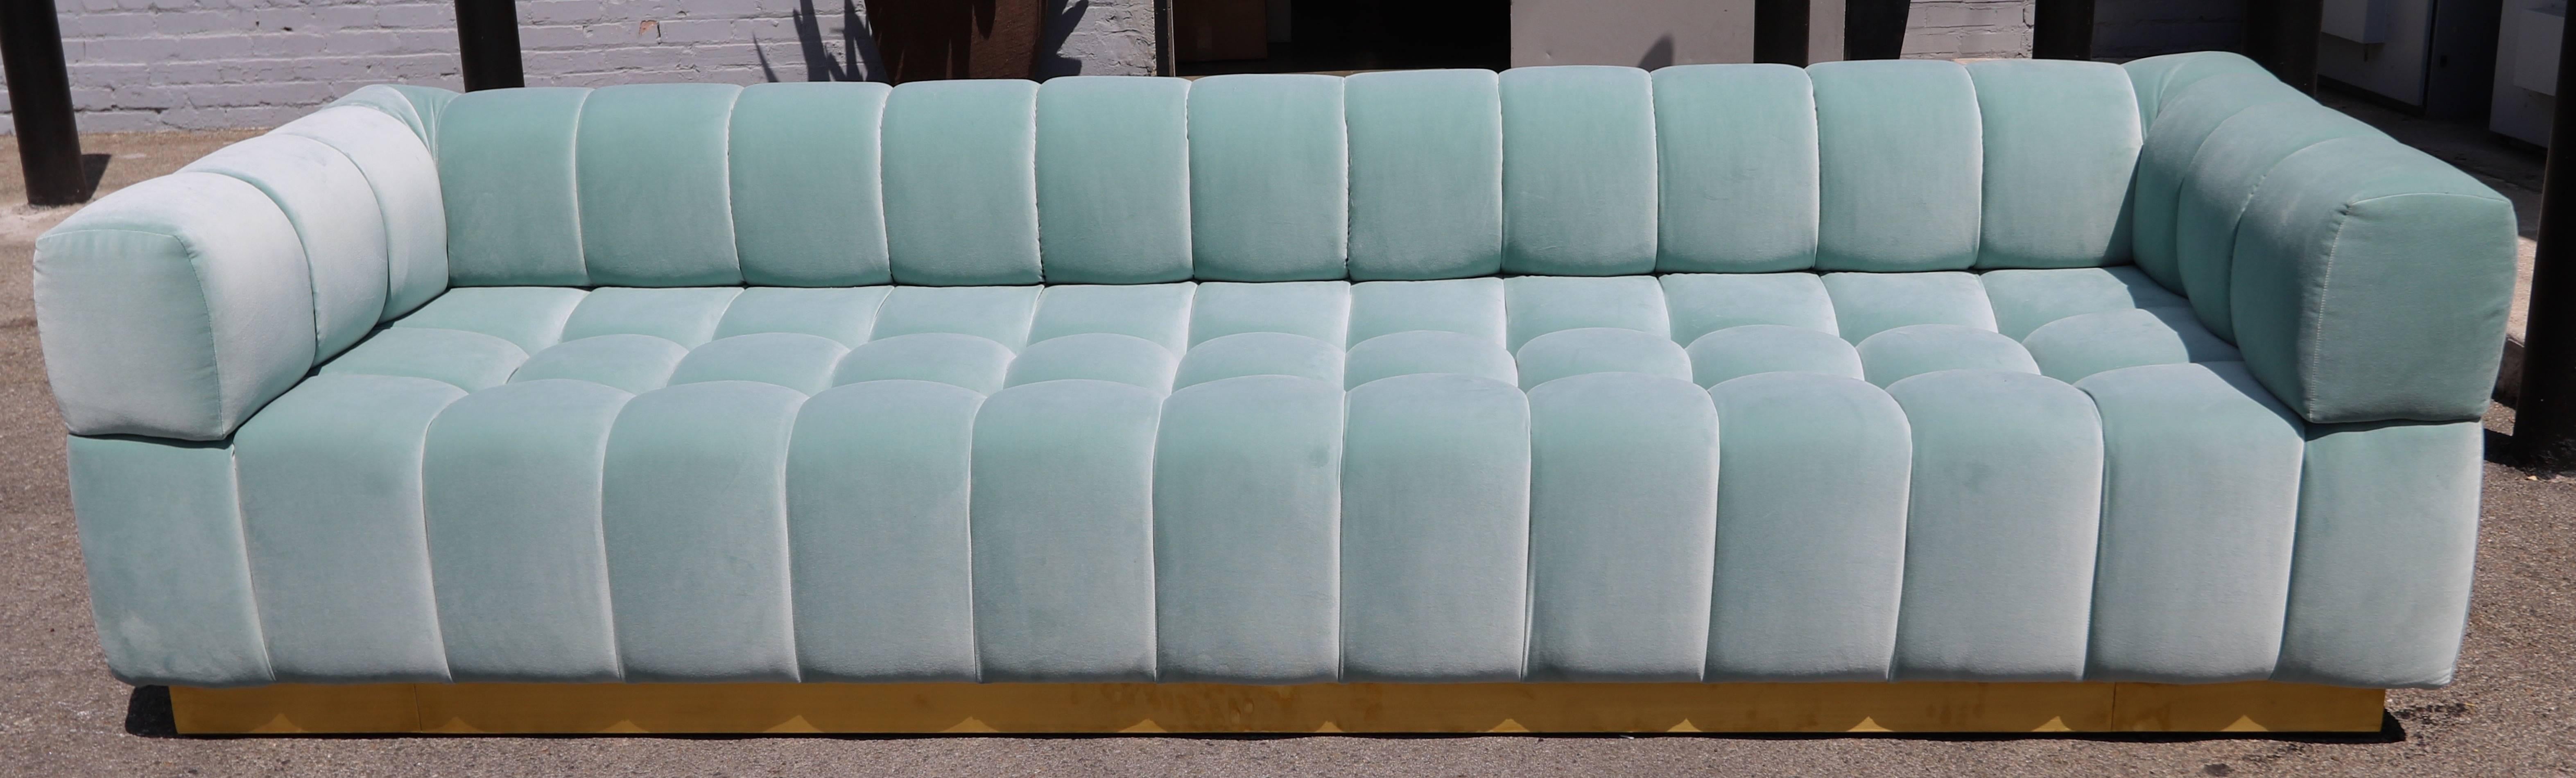 Custom tufted sofa with handmade brass base in aqua blue velvet.  Made in Los Angeles by Adesso Imports. Can be made in different colors and fabrics or a different metal for the base.